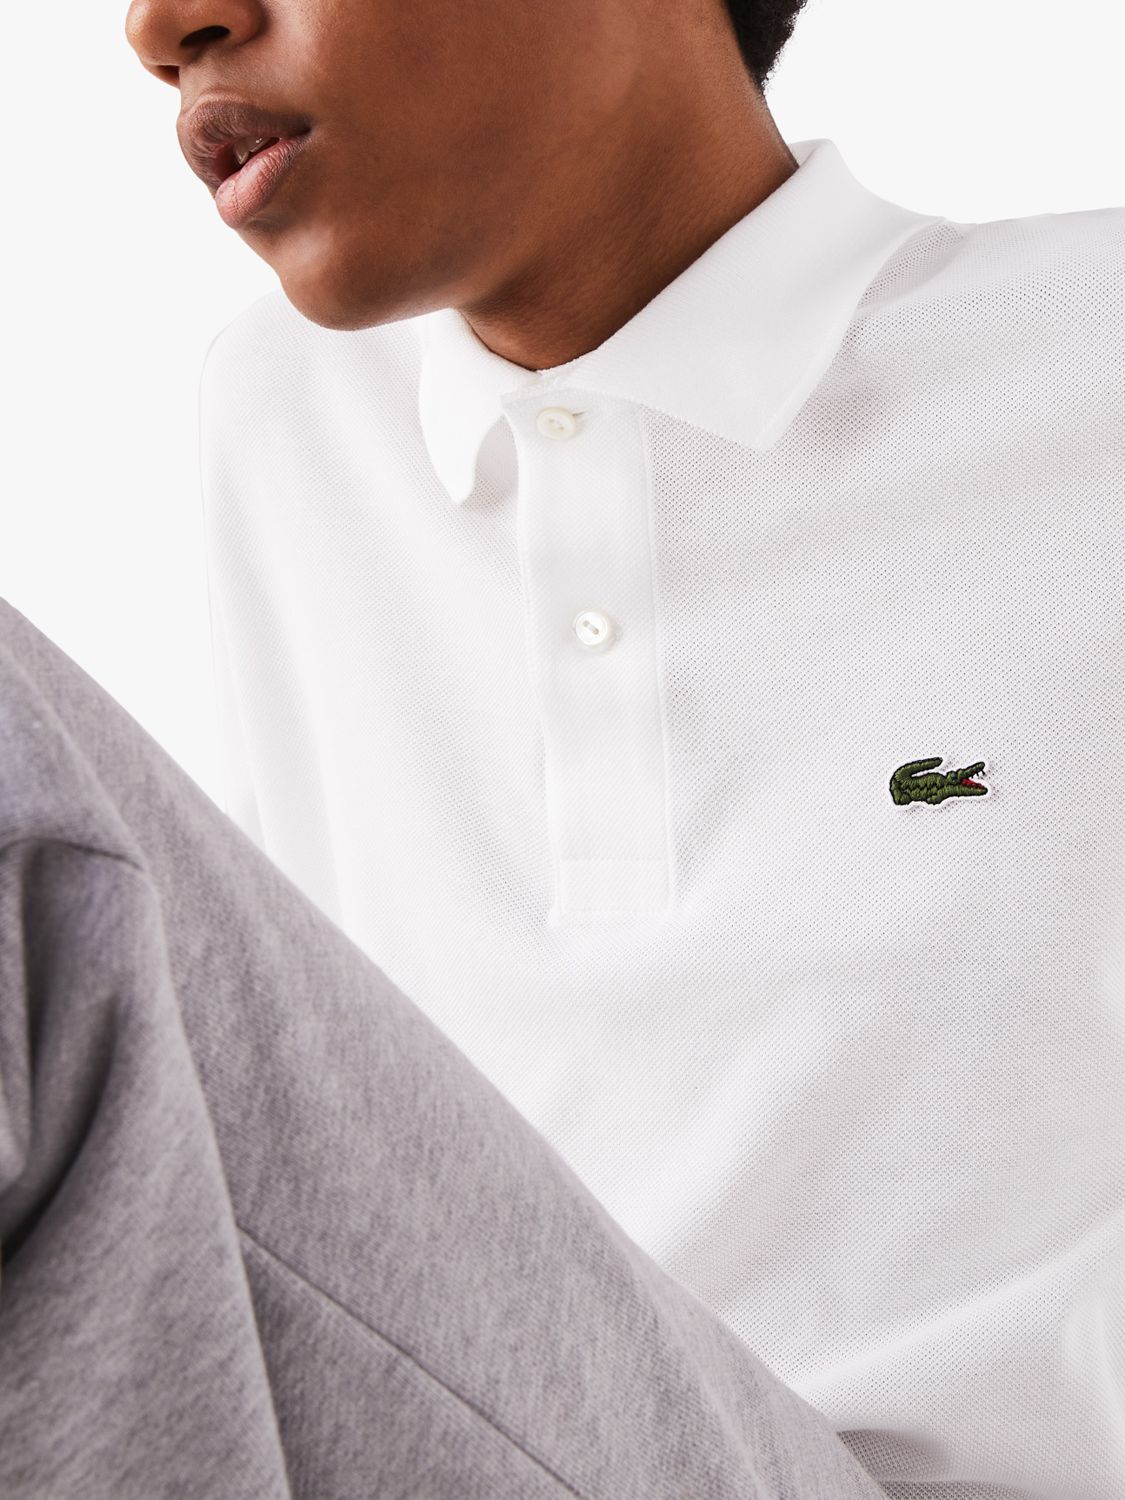 LACOSTE MENS SHIRTS- with typical characteristics of the brand